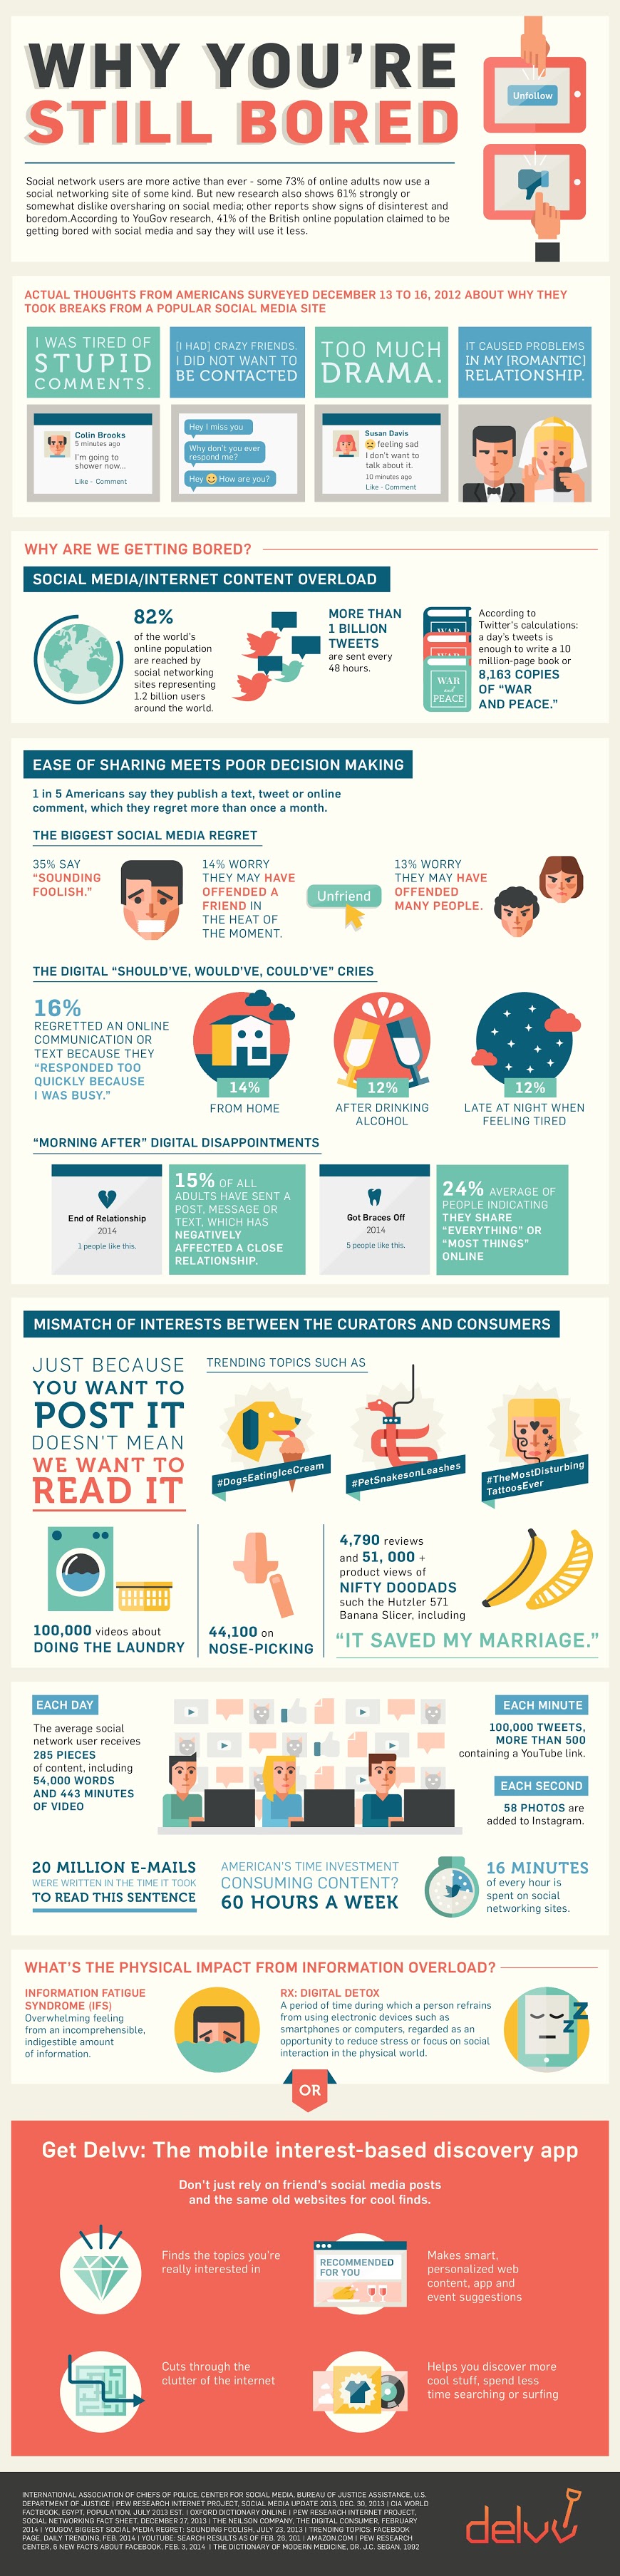 Are you Getting Bored with Social Media? You're Not Alone (Infographic)